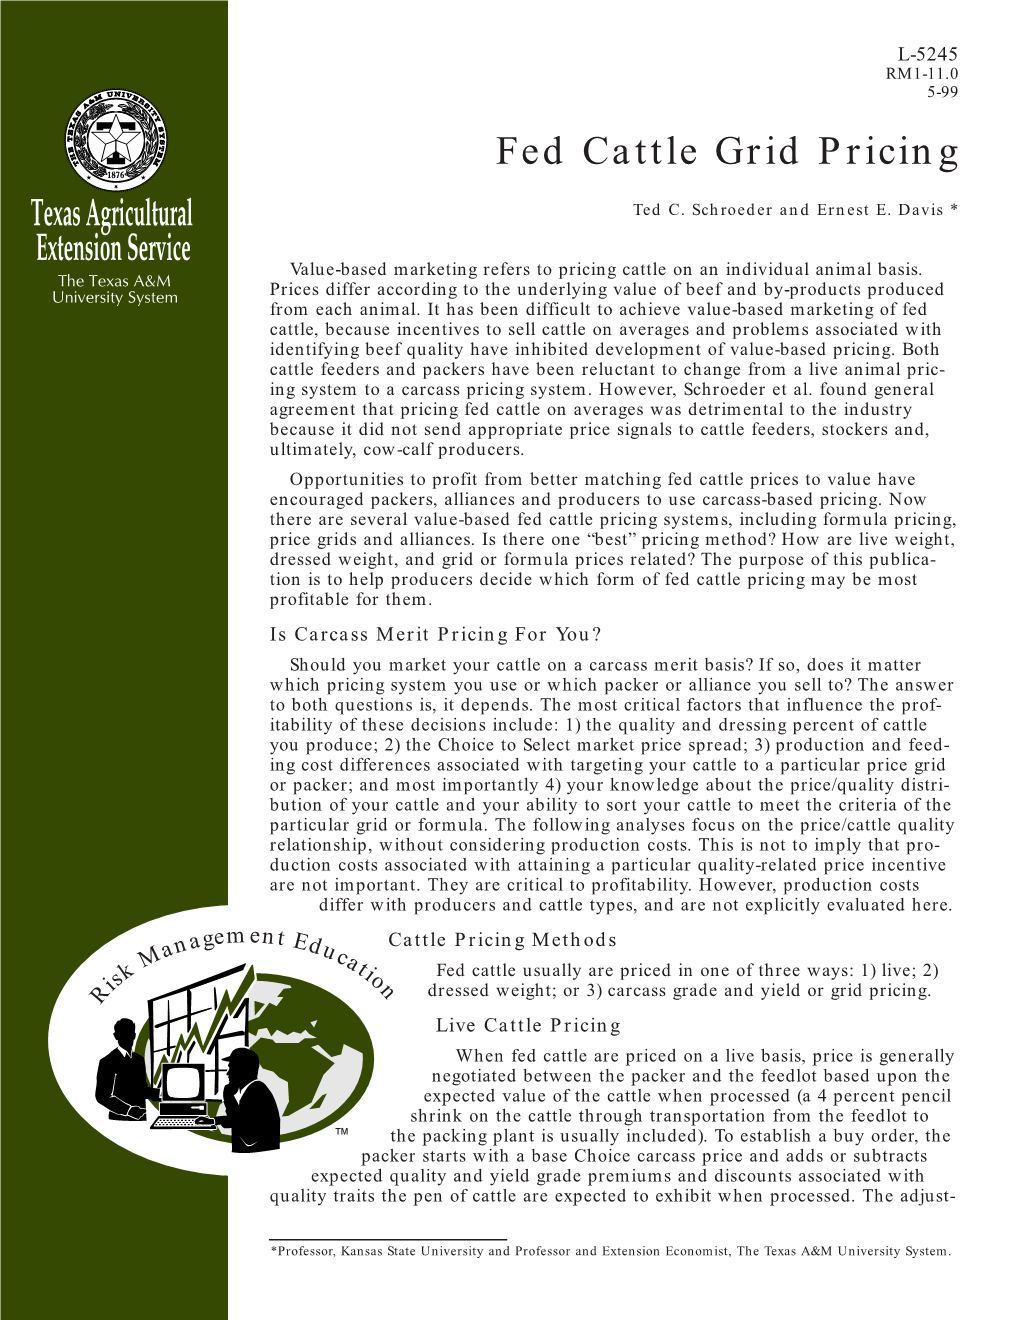 Fed Cattle Grid Pricing